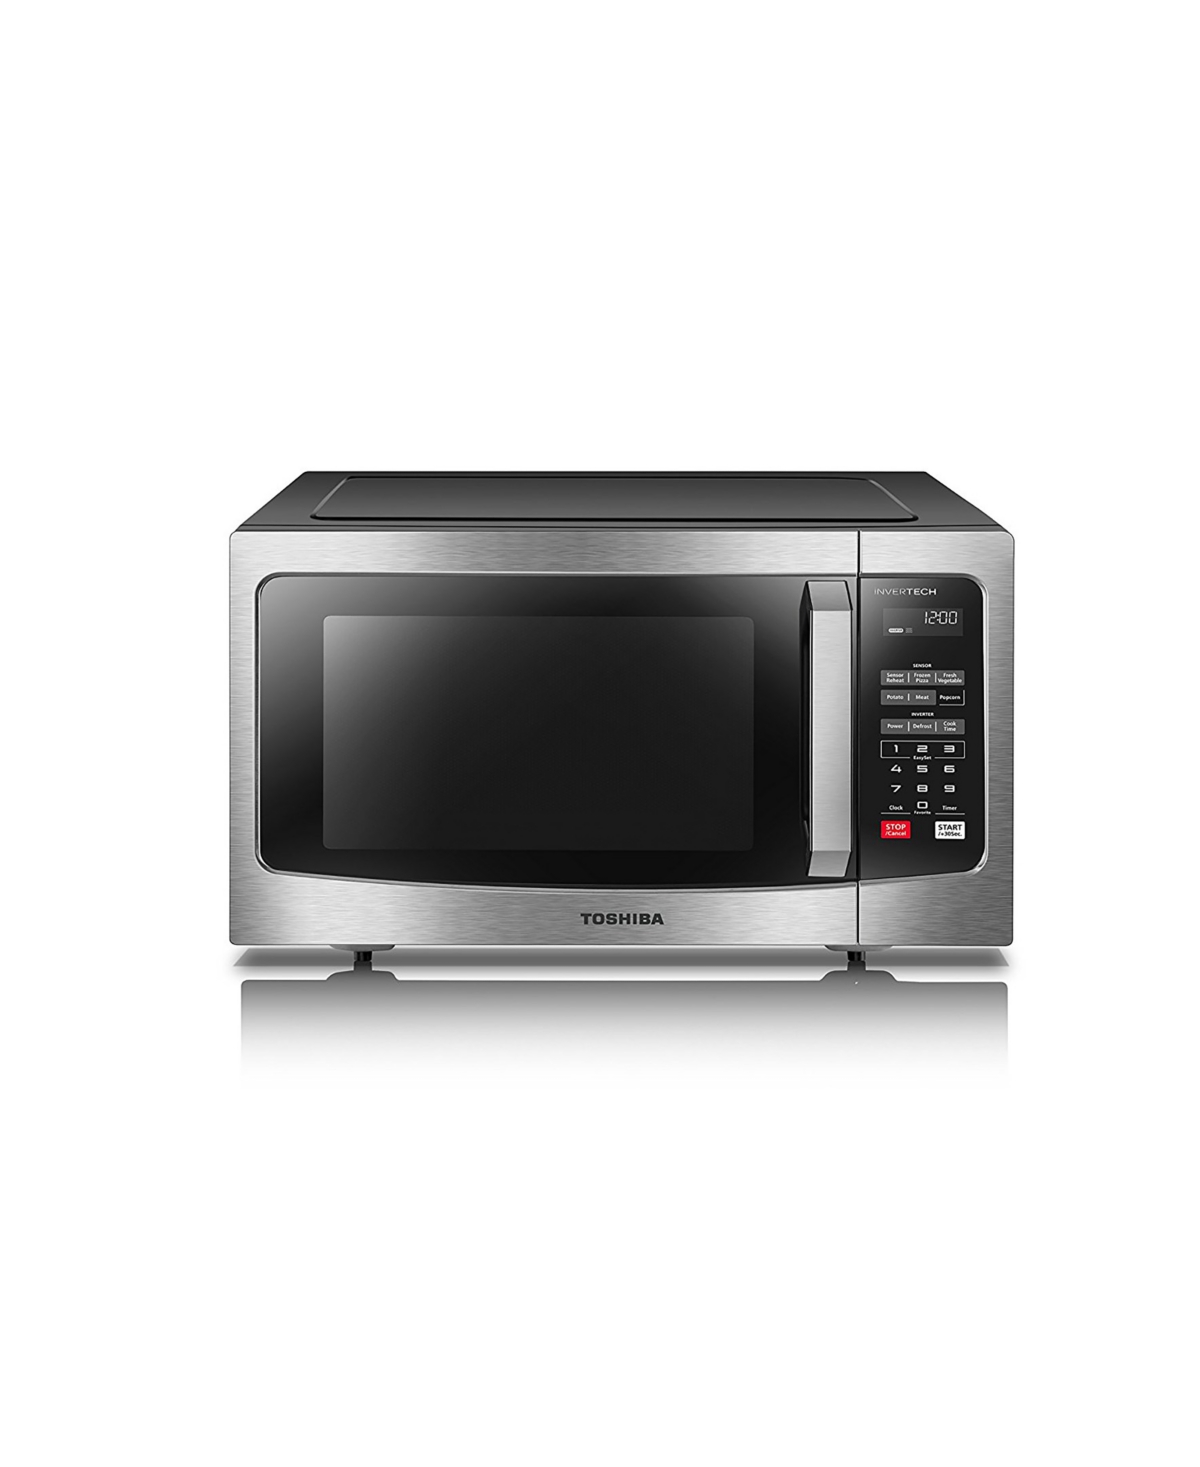 Toshiba 1.6 Cubic Feet Microwave With Inverter Technology In Stainless Steel